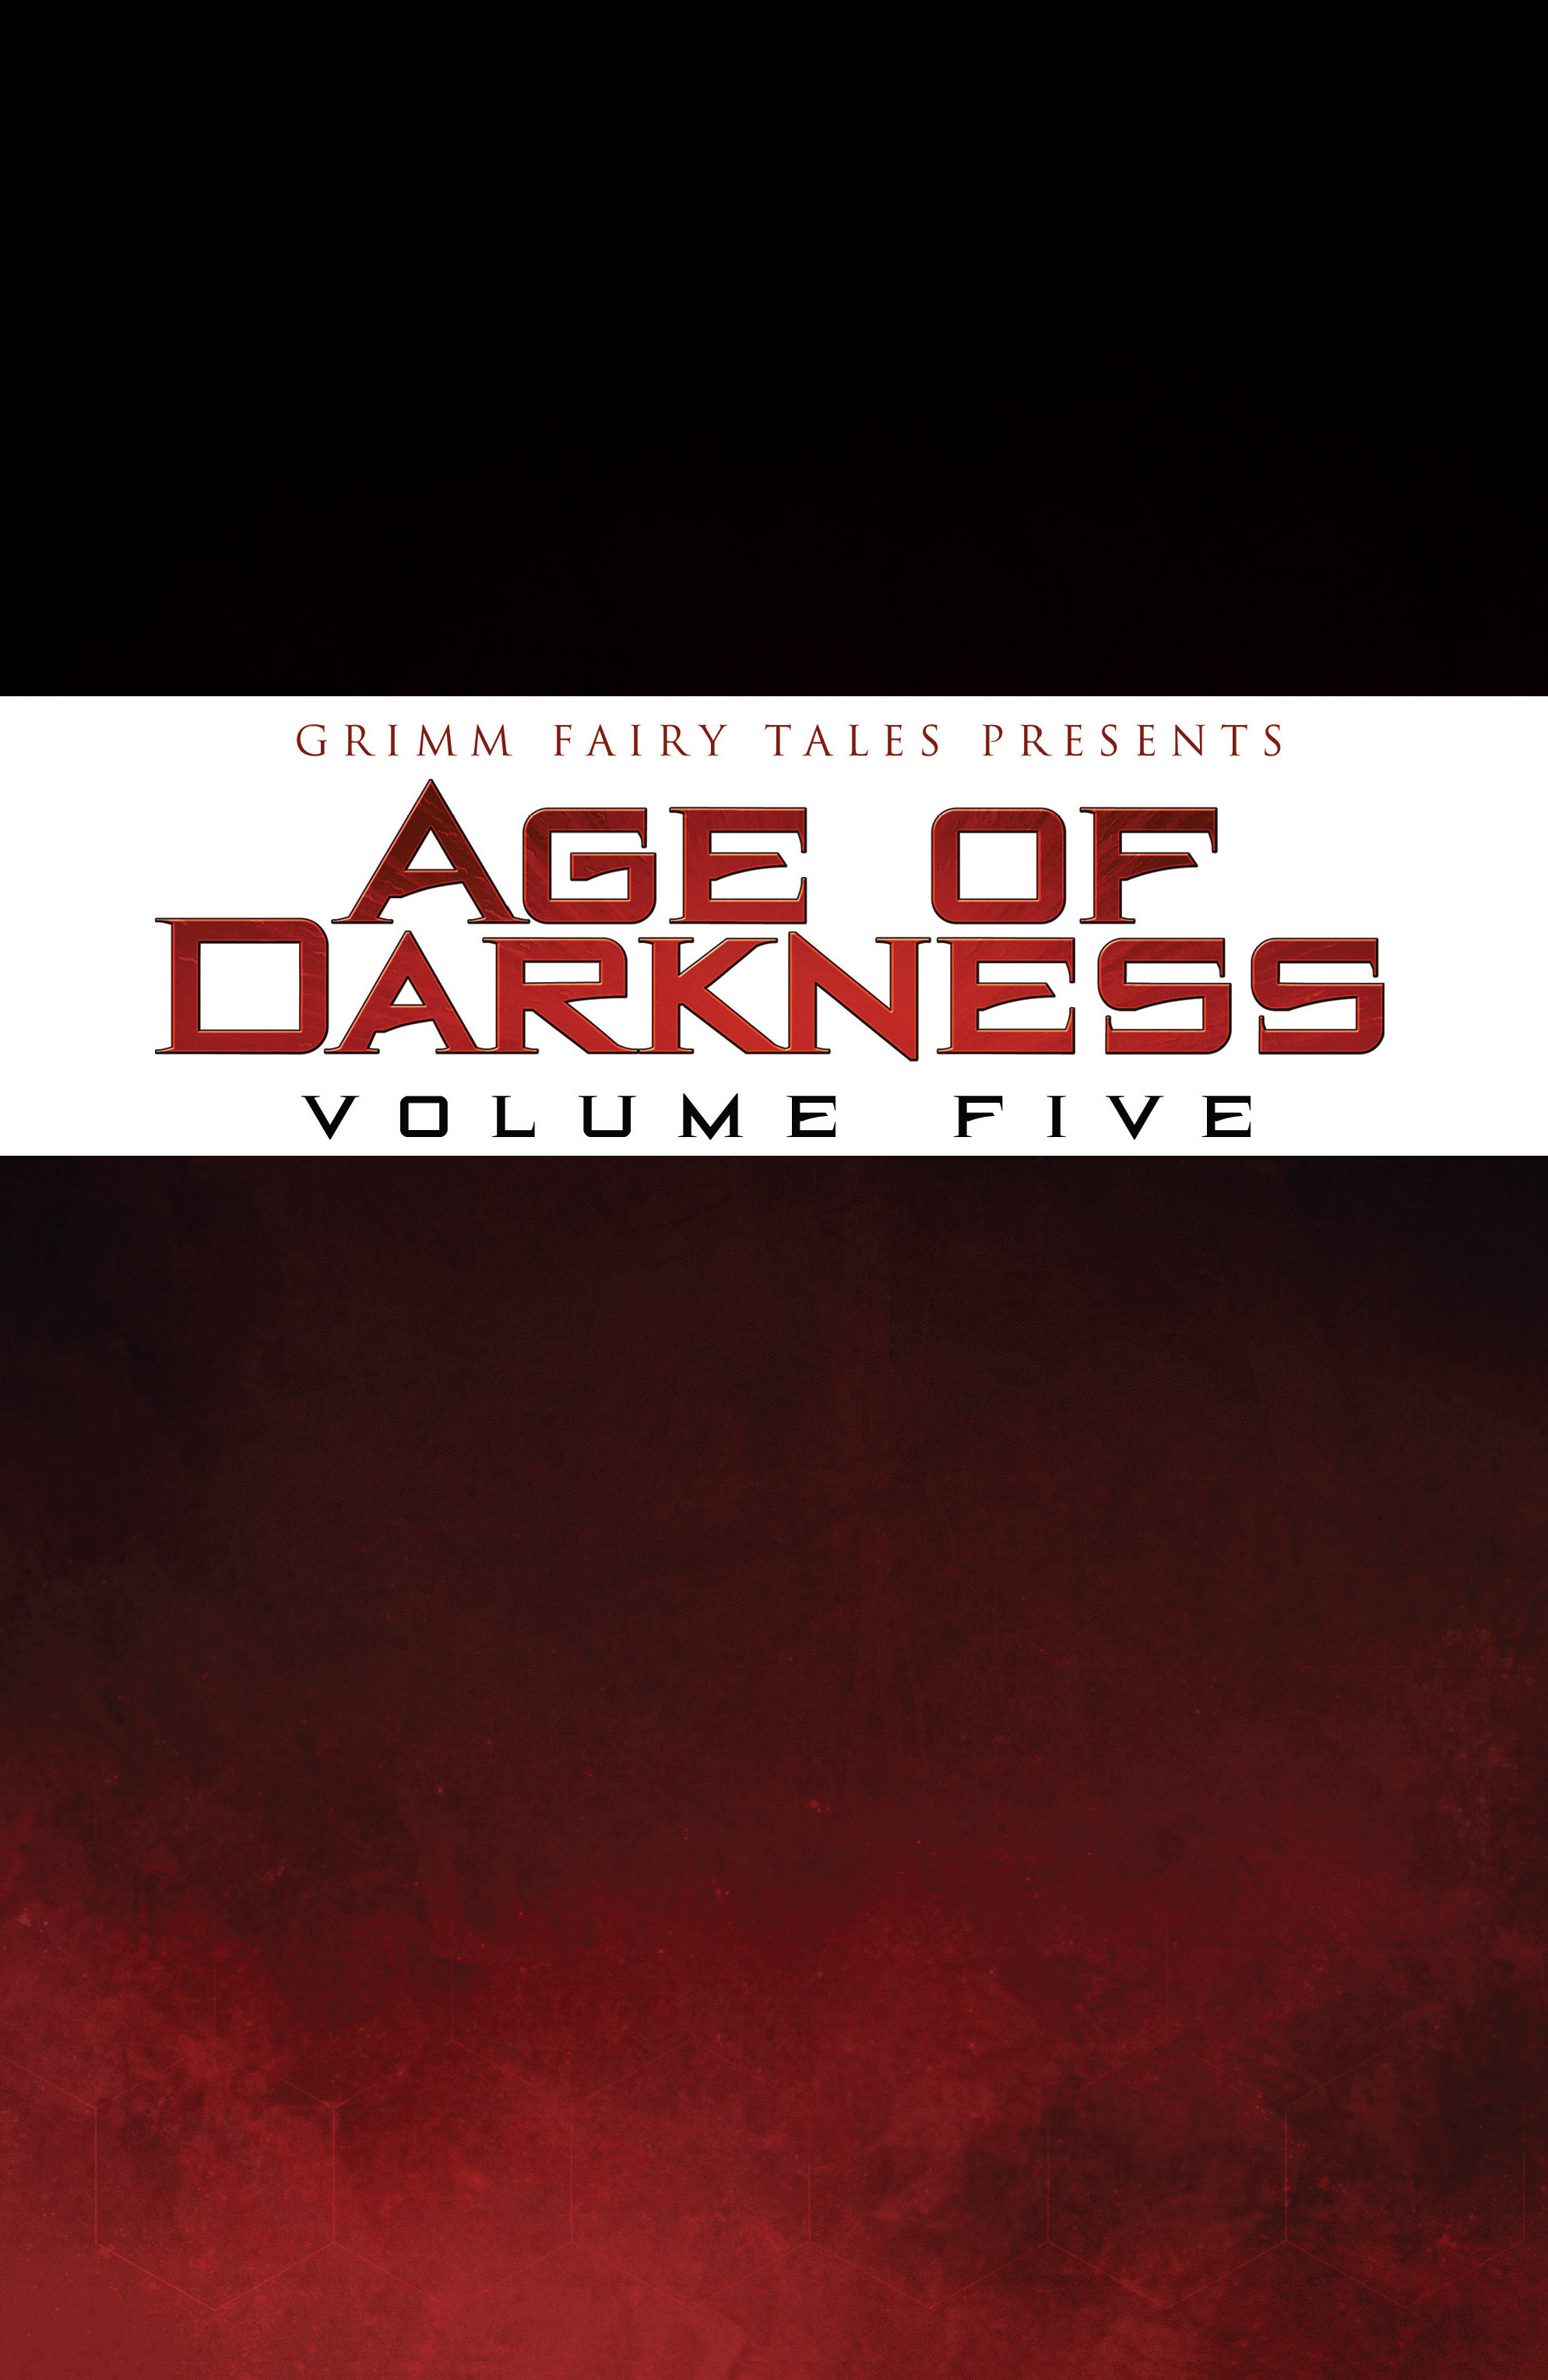 Read online Grimm Fairy Tales presents Age of Darkness comic -  Issue # Full - 5